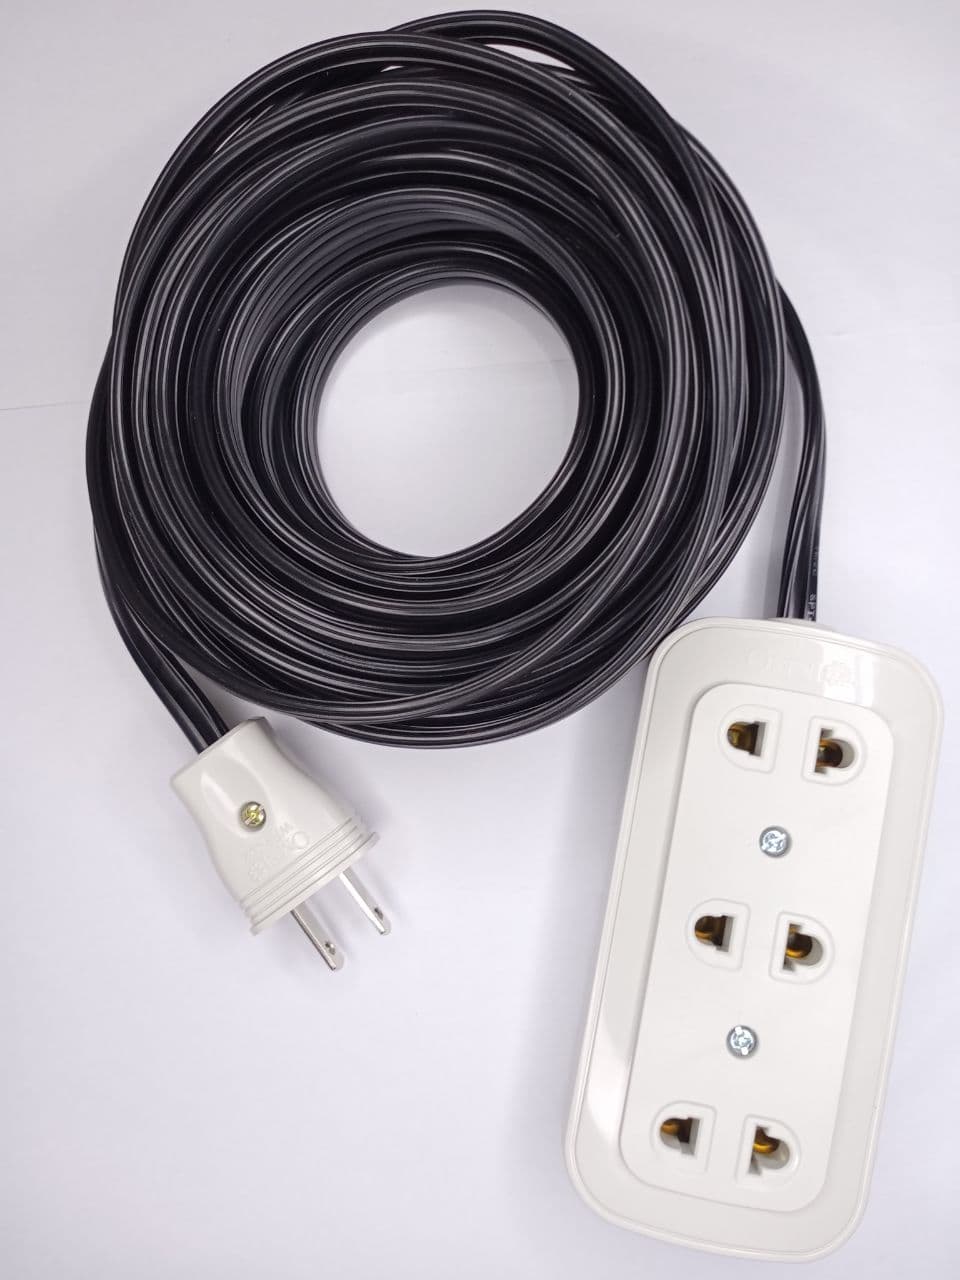 15 Best Extension Cord Black for 2023